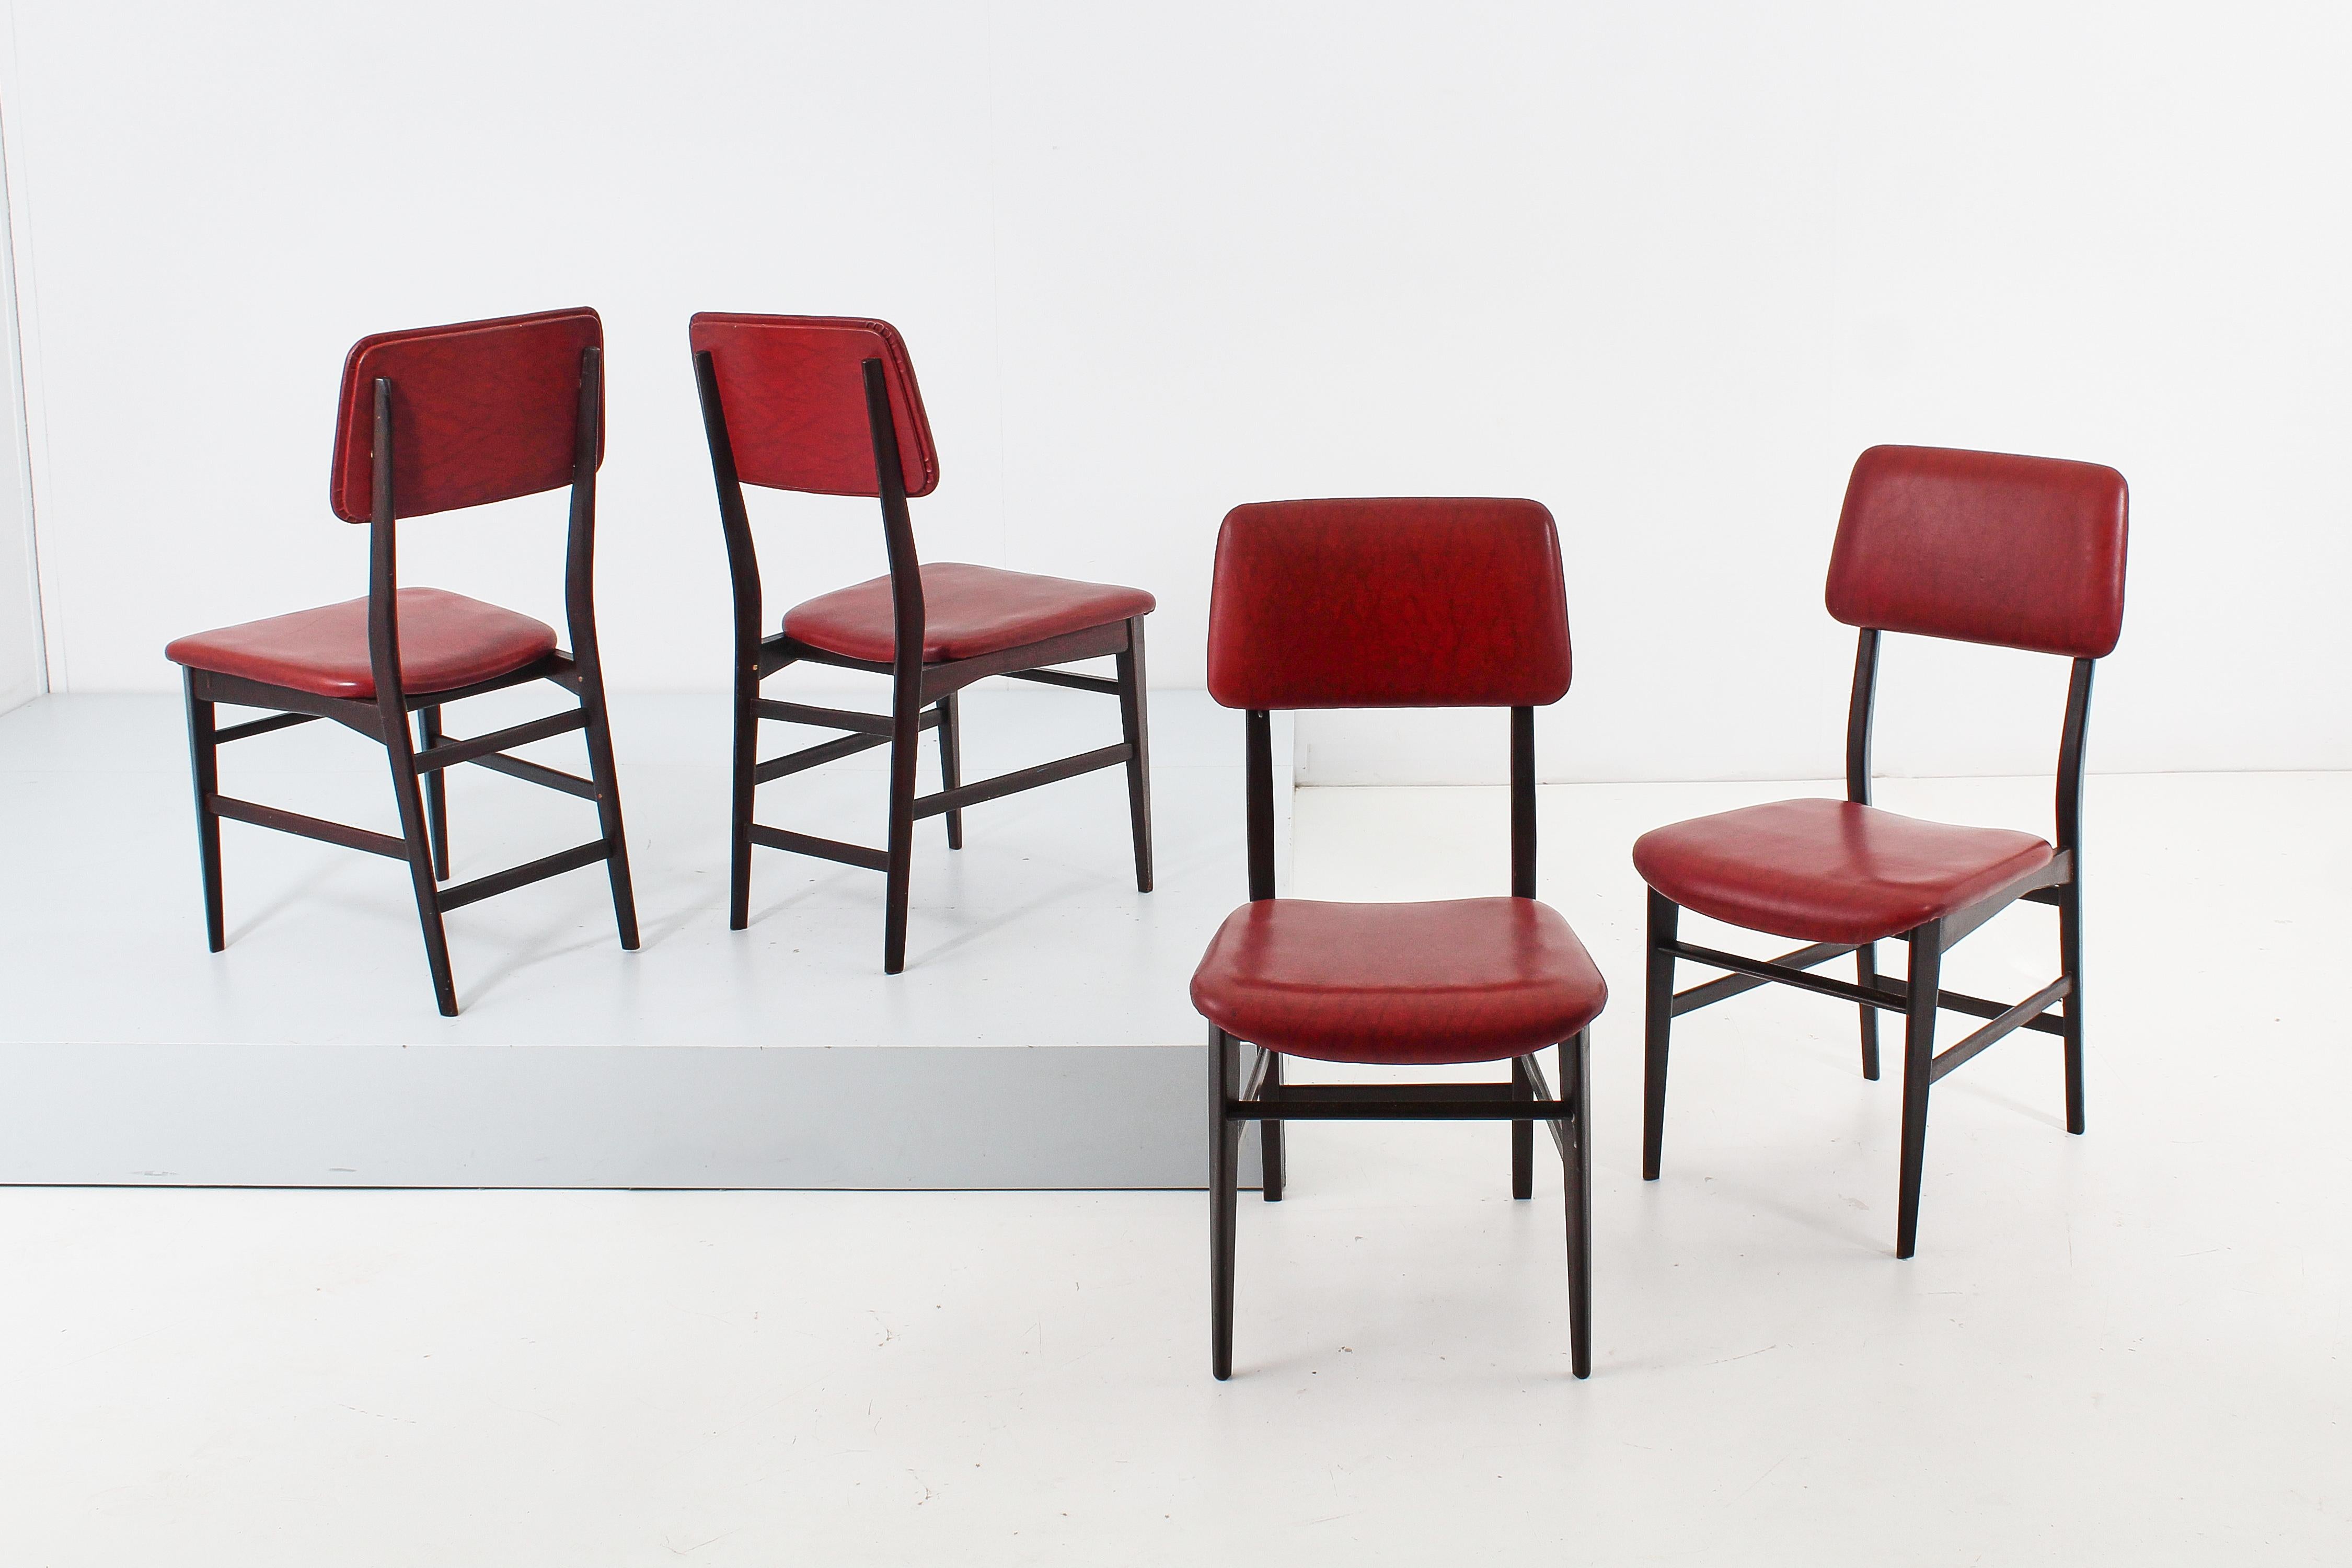 Wonderful and elegant set of four chairs with a harmonious and geometric design with shaped and wooden structure and padding covered in burgundy faux leather. Attributed to Edmondo Palutari and Vittorio Dassi, Italy in the 60s.